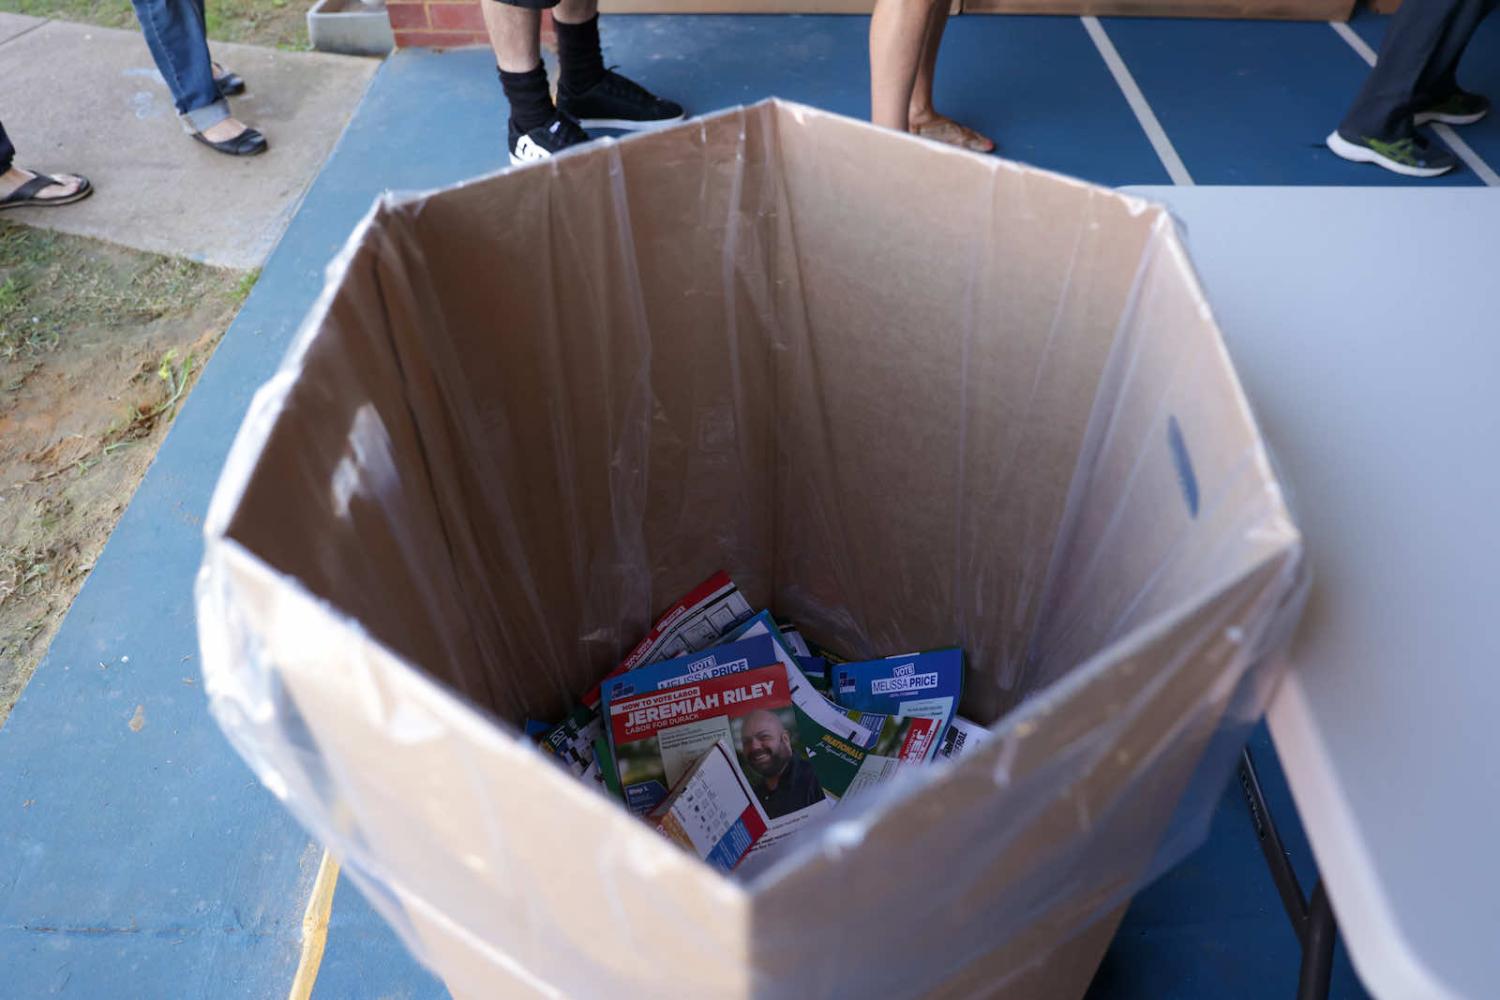 Discarded campaign leaflets after people have cast their votes at a polling centre  in Geraldton, Western Australia, during the 2022 federal election (Tamati Smith/Getty Images)